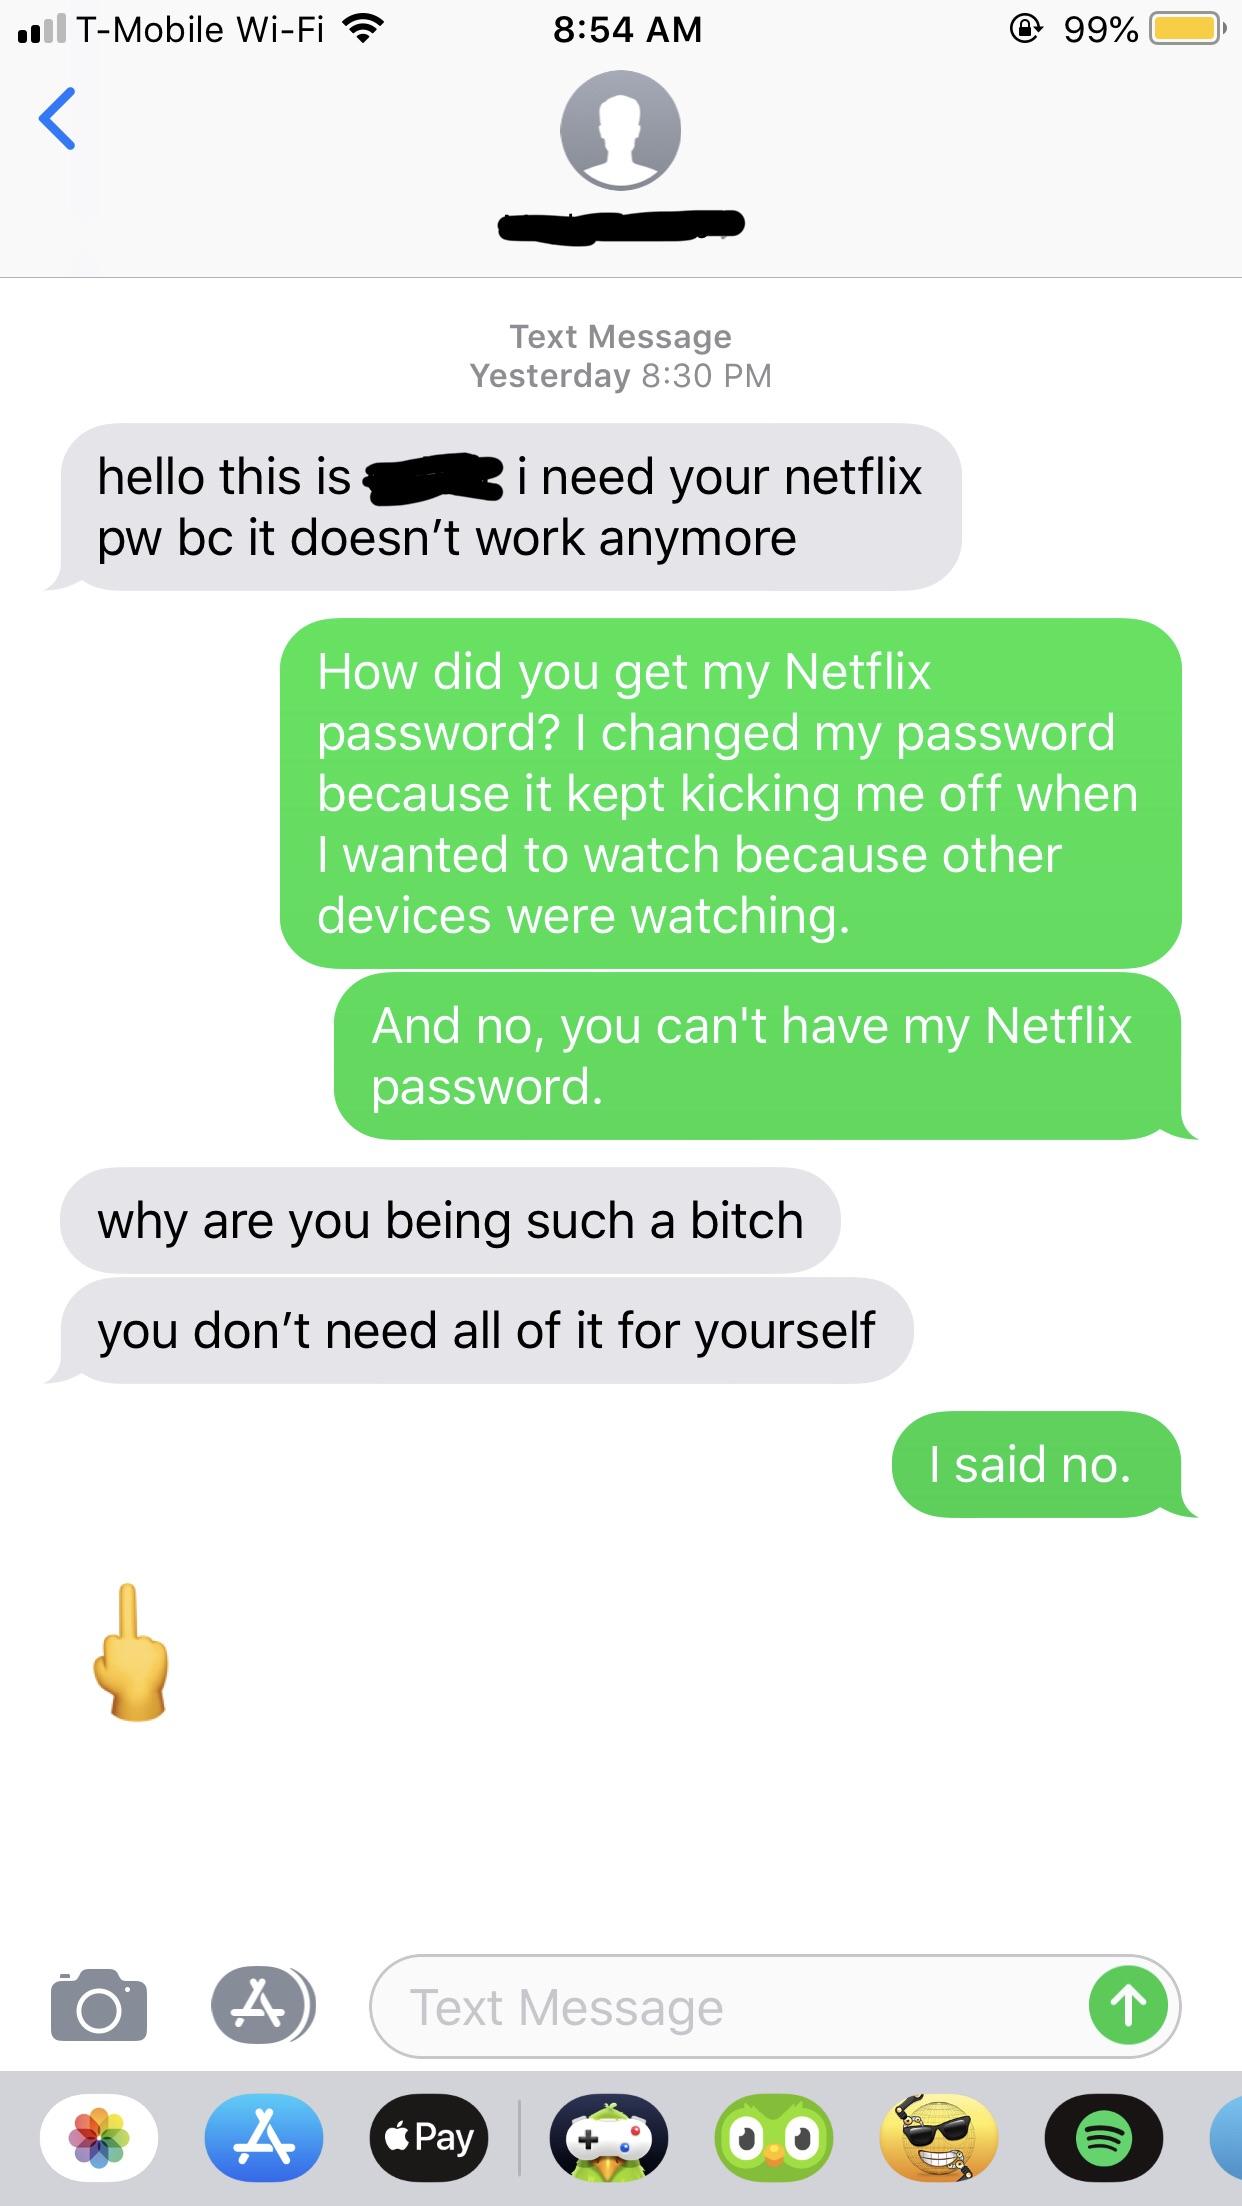 netflix passwords - . TMobile WiFi Text Message Yesterday hello this is i need your netflix pw bc it doesn't work anymore A A How did you get my Netflix password? I changed my password because it kept kicking me off when I wanted to watch because other de